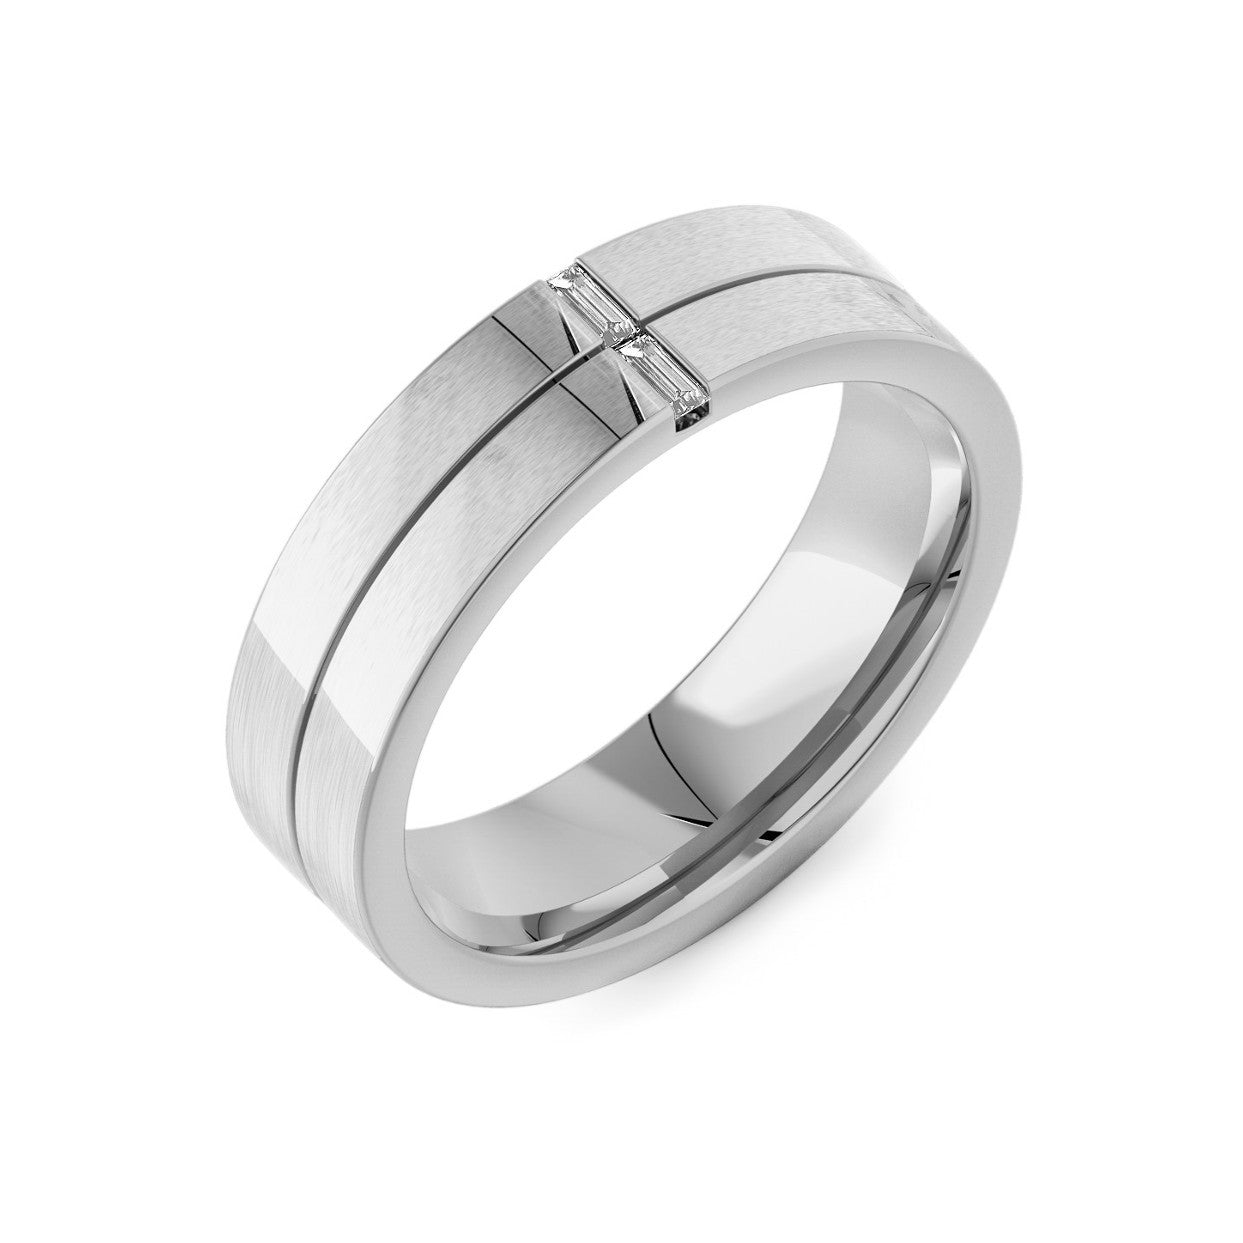 The Charles Tiffany Setting Men's Engagement Ring in Platinum with a Diamond  | Tiffany & Co.